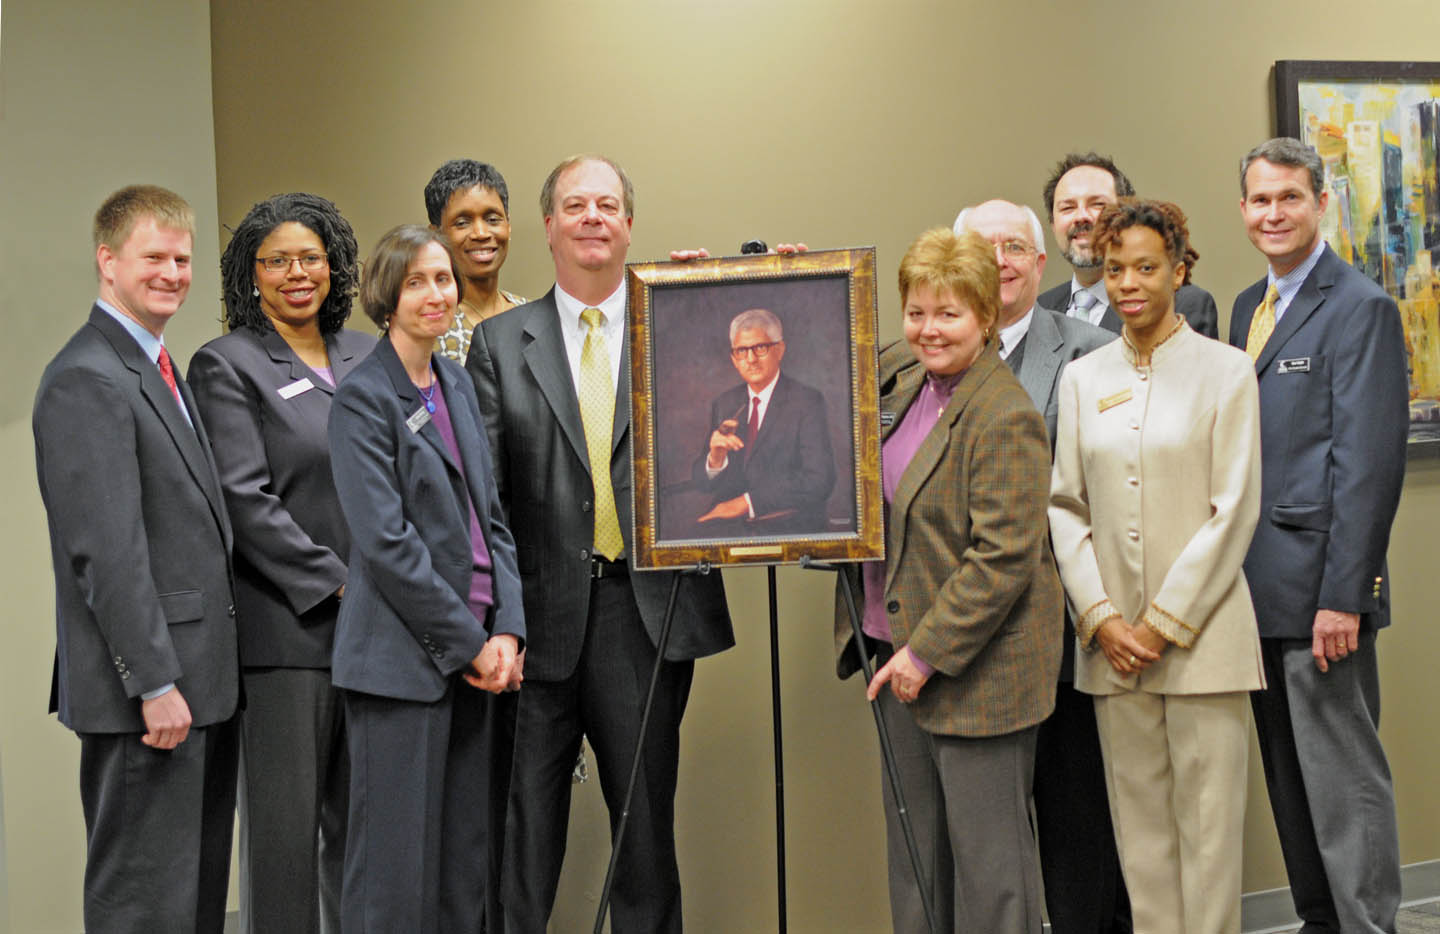 Click to enlarge,  Central Carolina Community College's President's Council gathered for the unveiling of a portrait of Dr. W. Dallas Herring at the college's Lee County Campus. The North Carolina Community College System and the 58 community colleges across the state recognized March 6 as "Dallas Herring Day." The portrait, a gift from the NCCCS, commemorates the  system's 50th anniversary and Herring's vision and tireless work in promoting community colleges as institutions of comprehensive education. Pictured (from left) are Dr. Phillip Price, vice president for Administrative Services; Dr. Pam Senegal, vice president for Economic and Community Development; Celia Hurley,  vice president for Instructional Advancement; Stacey Carter-Coley, Esq., executive director of Human Resources and Ethics Liaison; Dr. Bud Marchant, president; Dr. Lisa Chapman, executive vice president for Instruction; Bill Tyson, Harnett County provost; William Messersmith (back), associate director of Human Resources; Nicole Brown, Human Resources instructor; and Ken Hoyle, vice president of Student Services.  